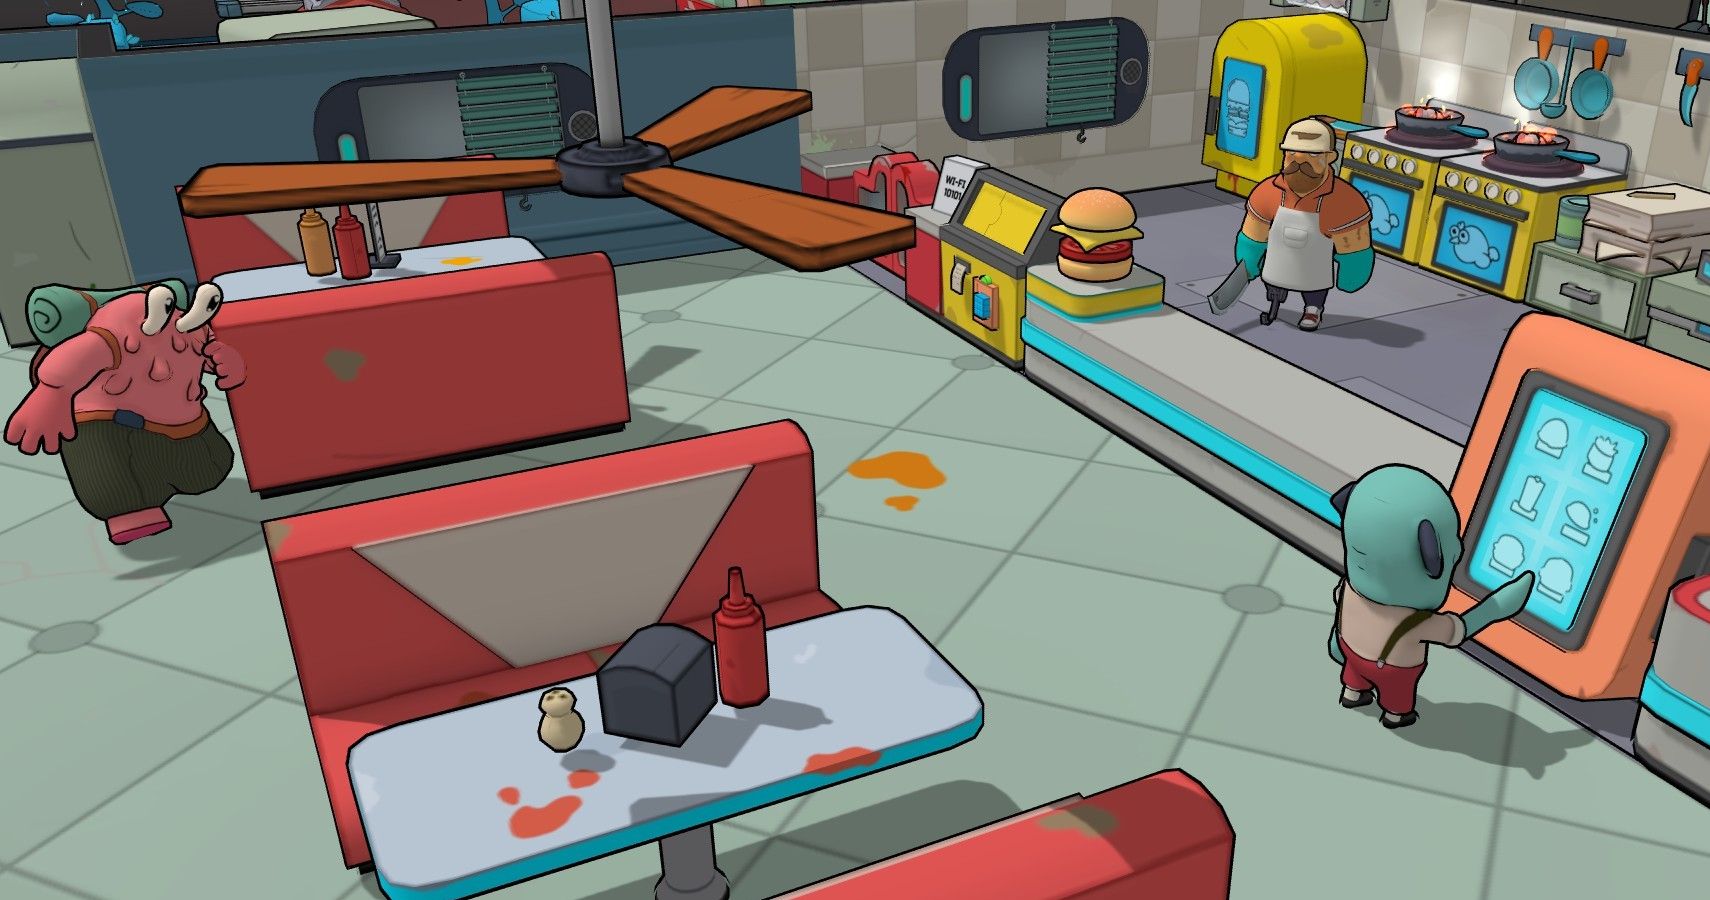 download the new version for ios Godlike Burger